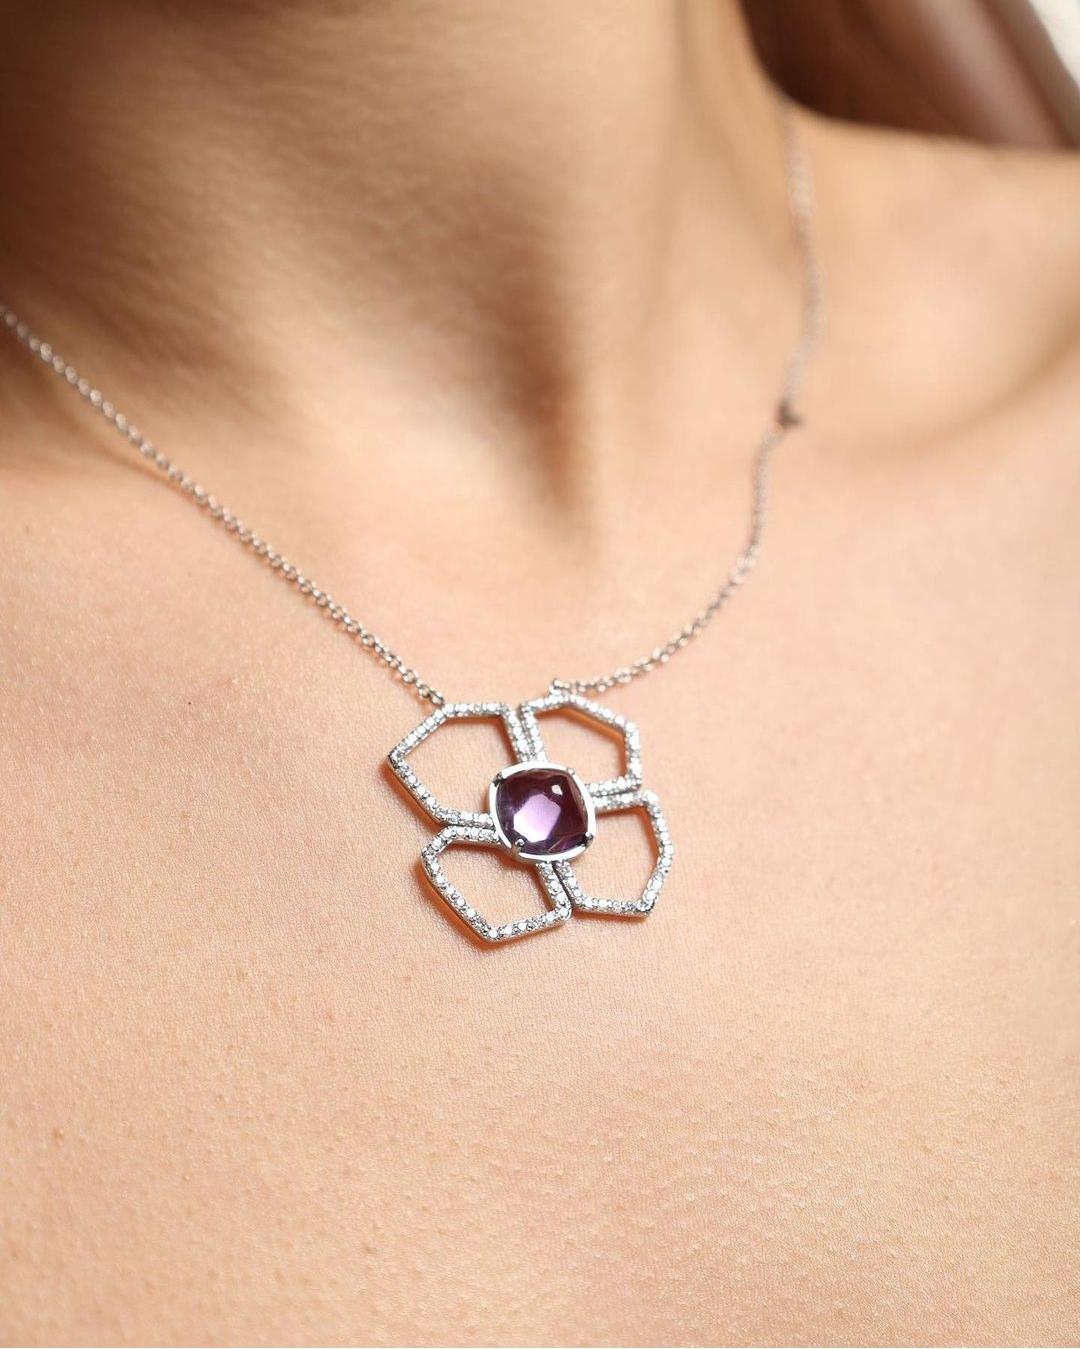 This beautiful pendant   Acquabella collection made of 18 carat white  gold weighs 7.81 grams boasts a central cabochon amethyst of 4.1 carat and VS G color diamonds  0,86 carats. the  necklace is adjastable at the back and goes from 42 cm to 48